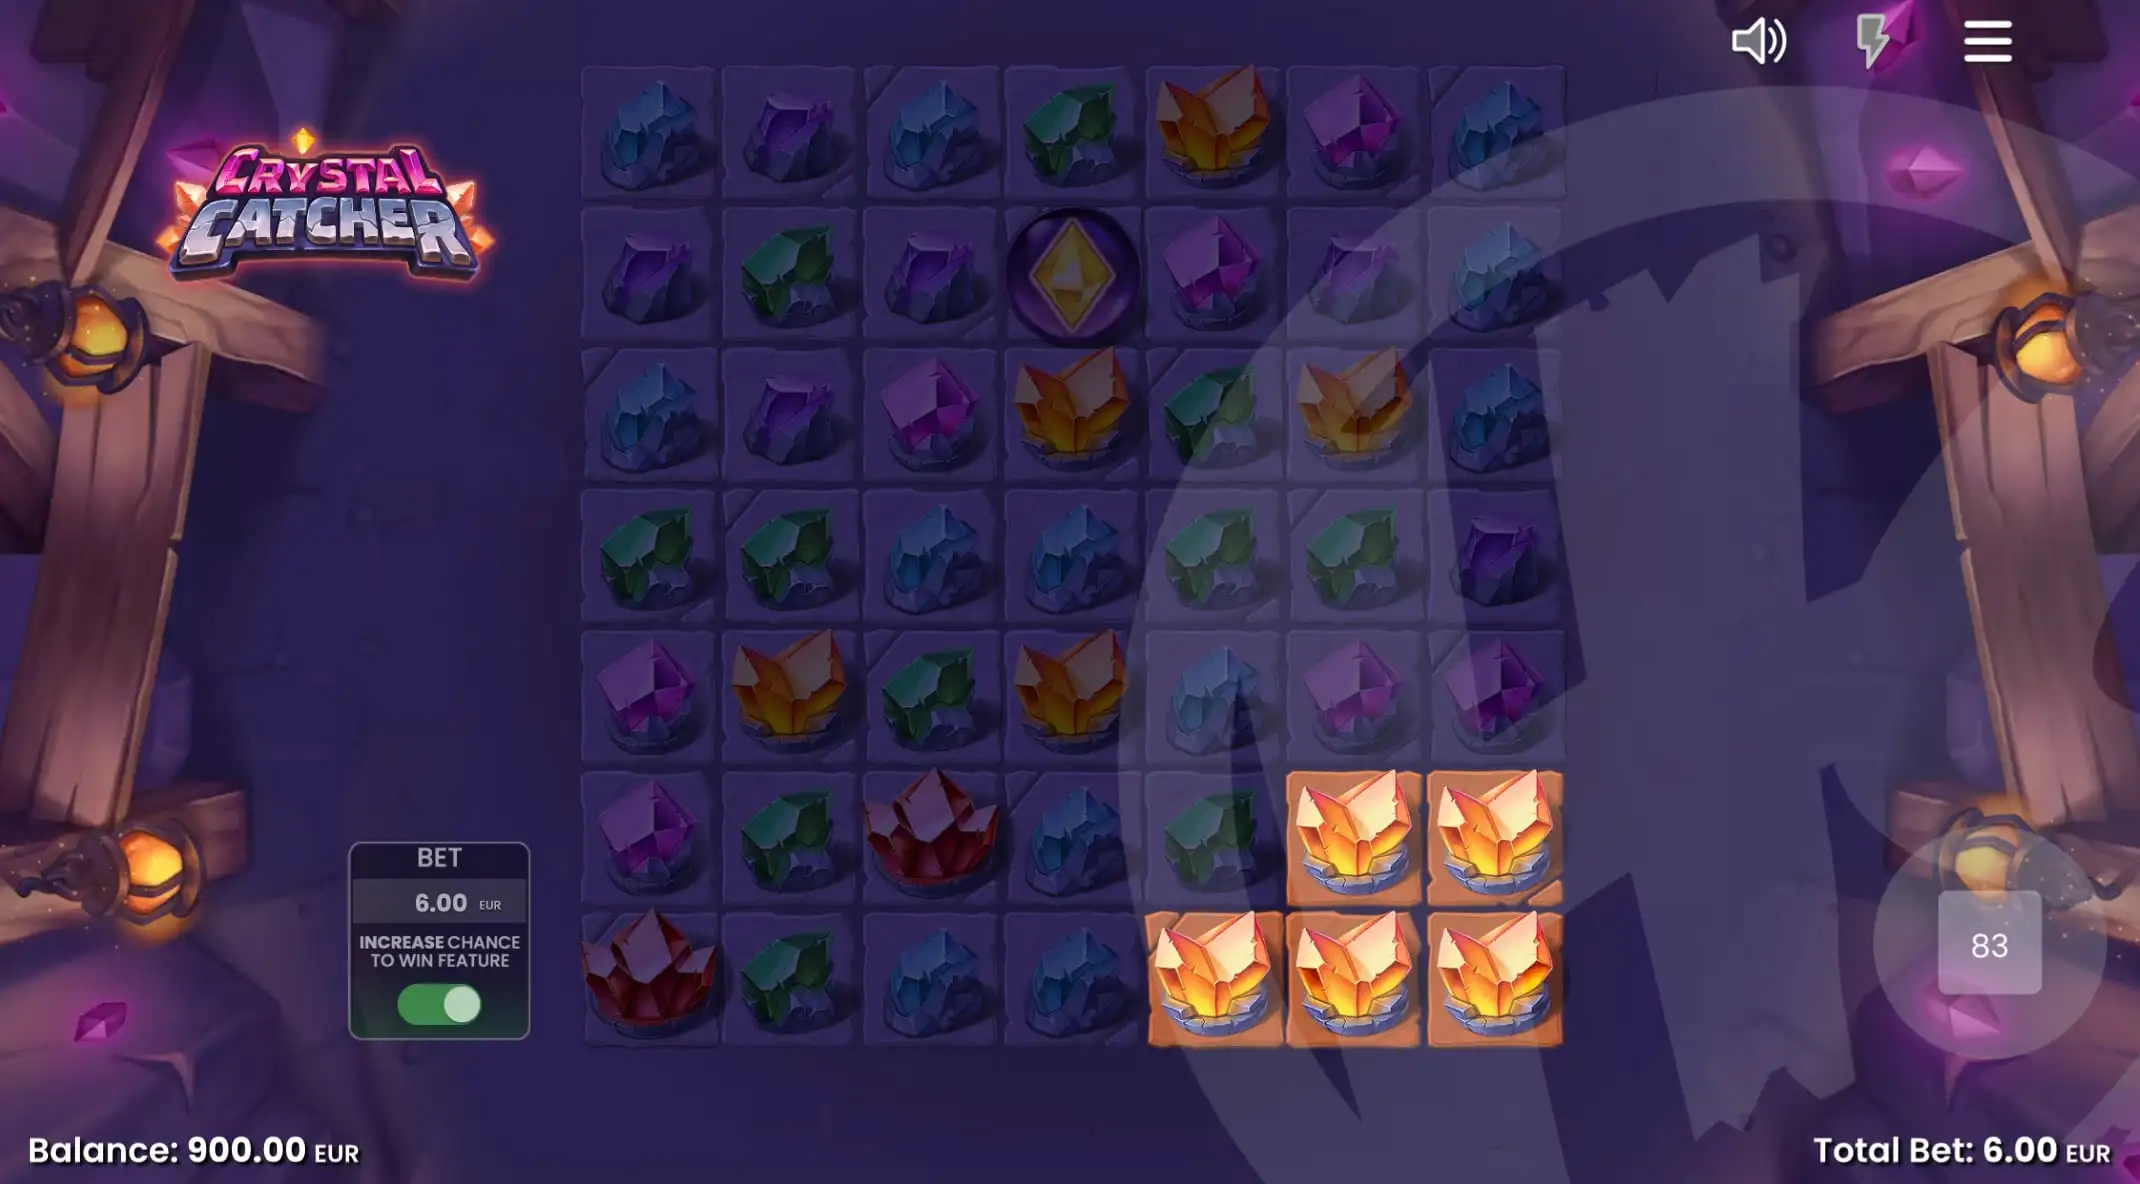 Match Clusters of 5 or More Symbols to Form Wins on Crystal Catcher